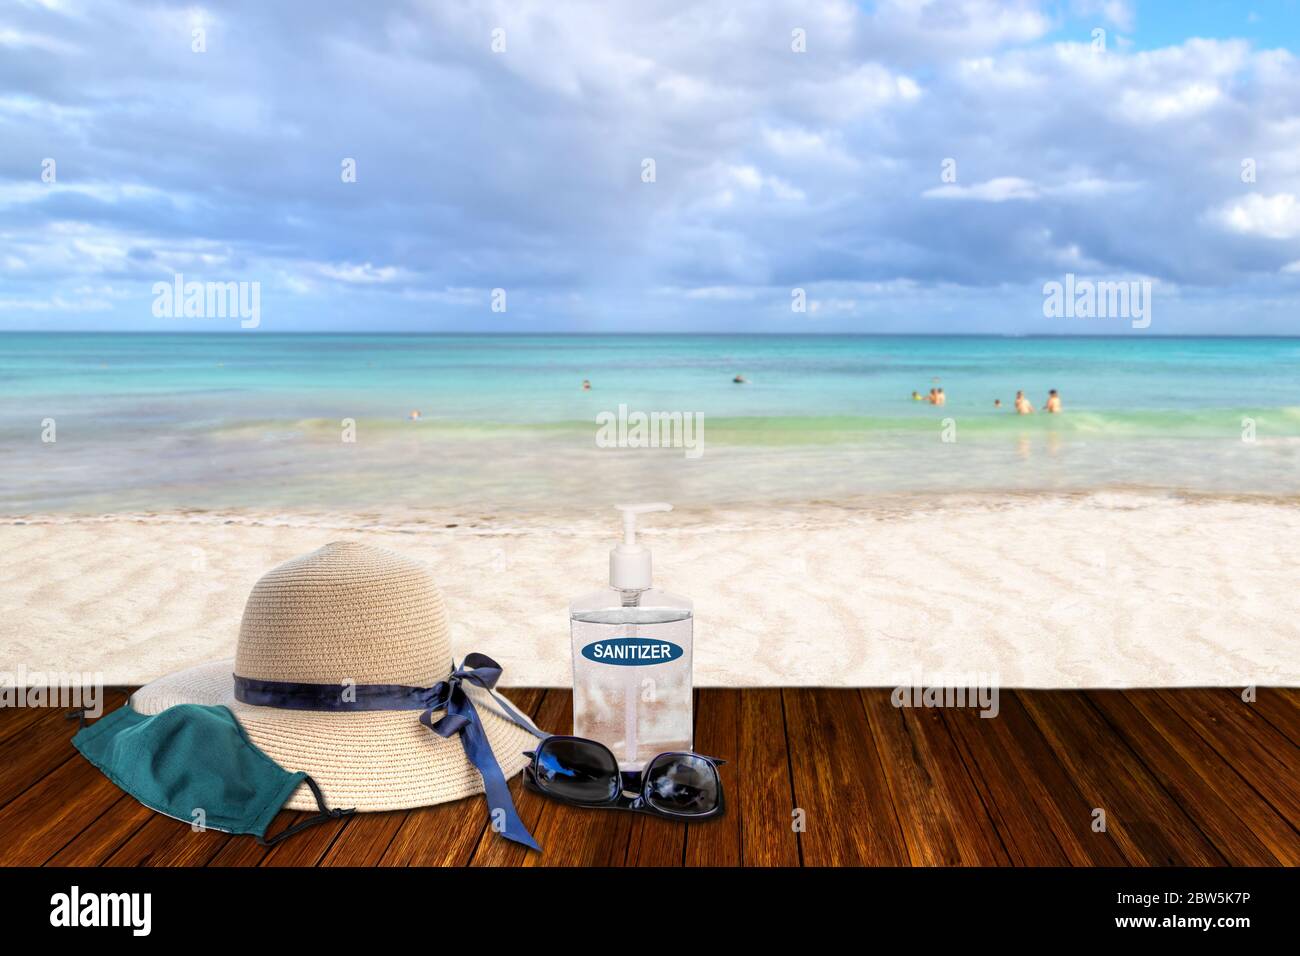 Vacationing in the New Normal after COVID-19 coronavirus pandemic. Tourism concept showing sandy beach with beach straw hat, sunglasses, hand sanitize Stock Photo